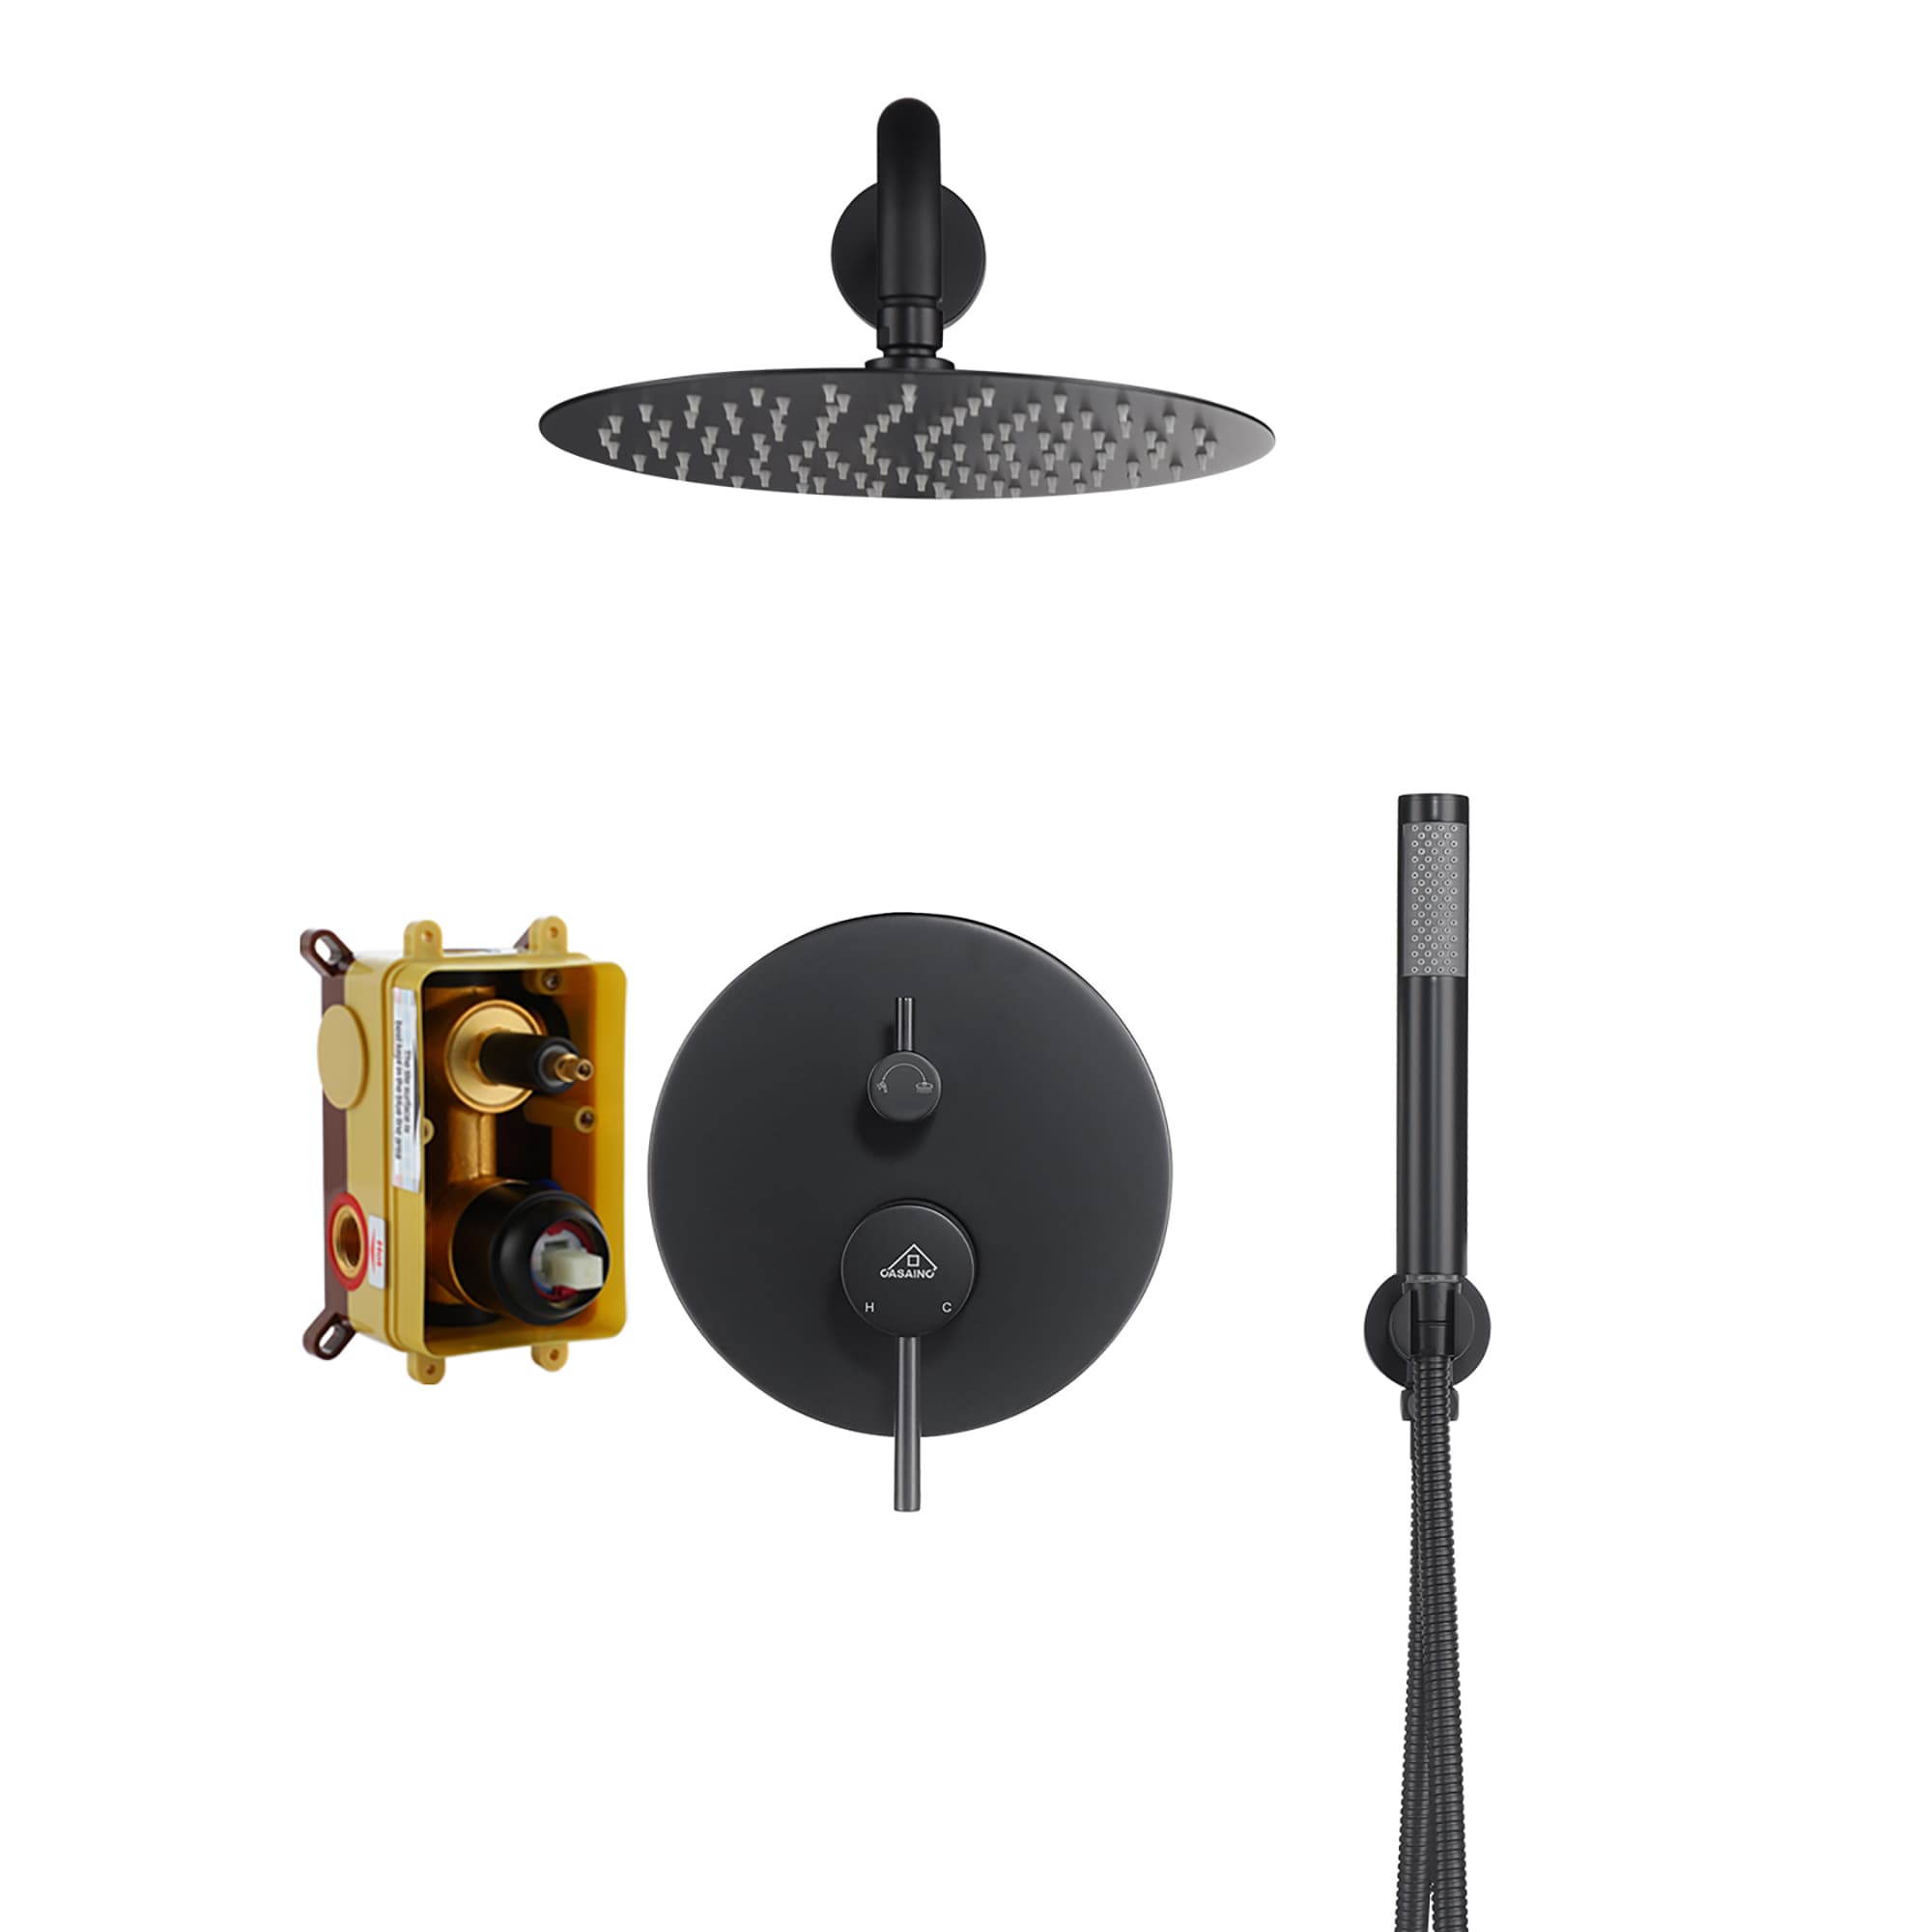 CASAINC Black Waterfall Built-In Shower Faucet System with 2-way Diverter Pressure-balanced Valve Included